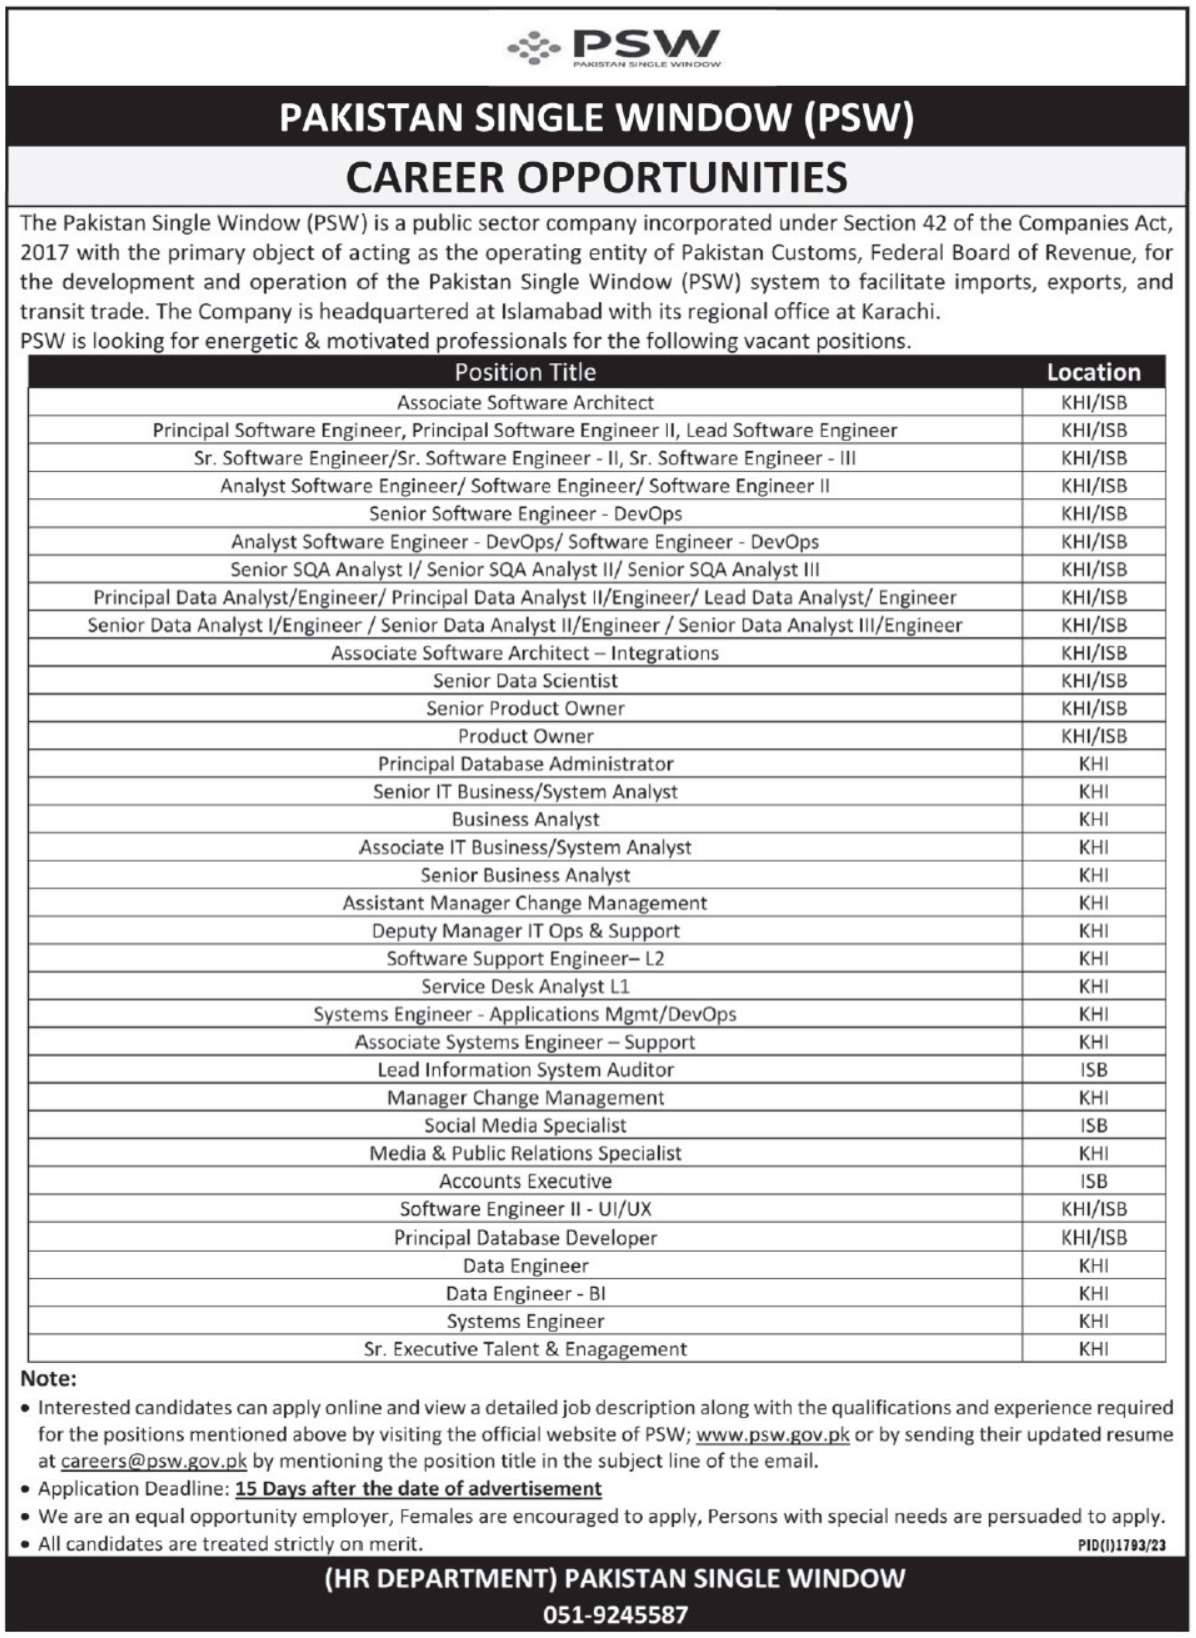 Exciting Career Opportunities at Pakistan Single Window PSW